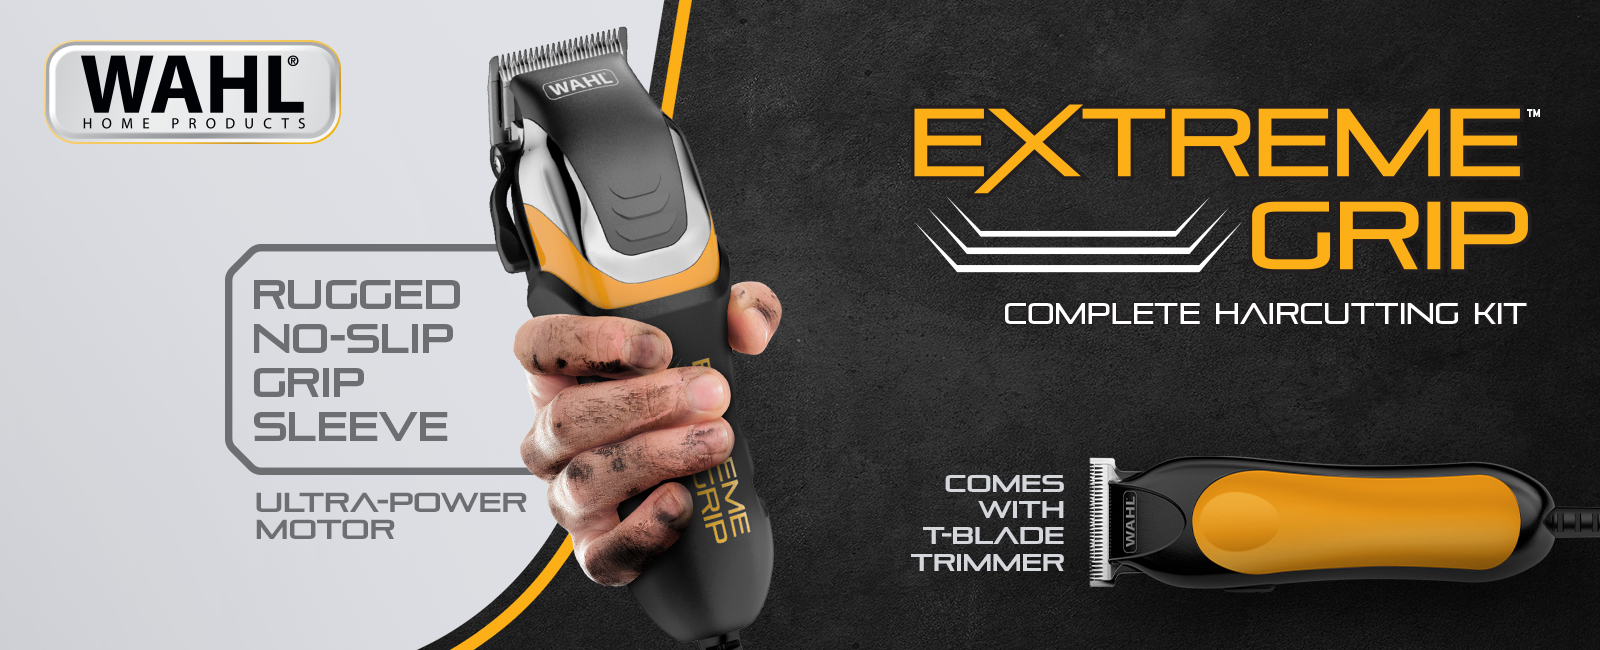 wahl extreme grip review